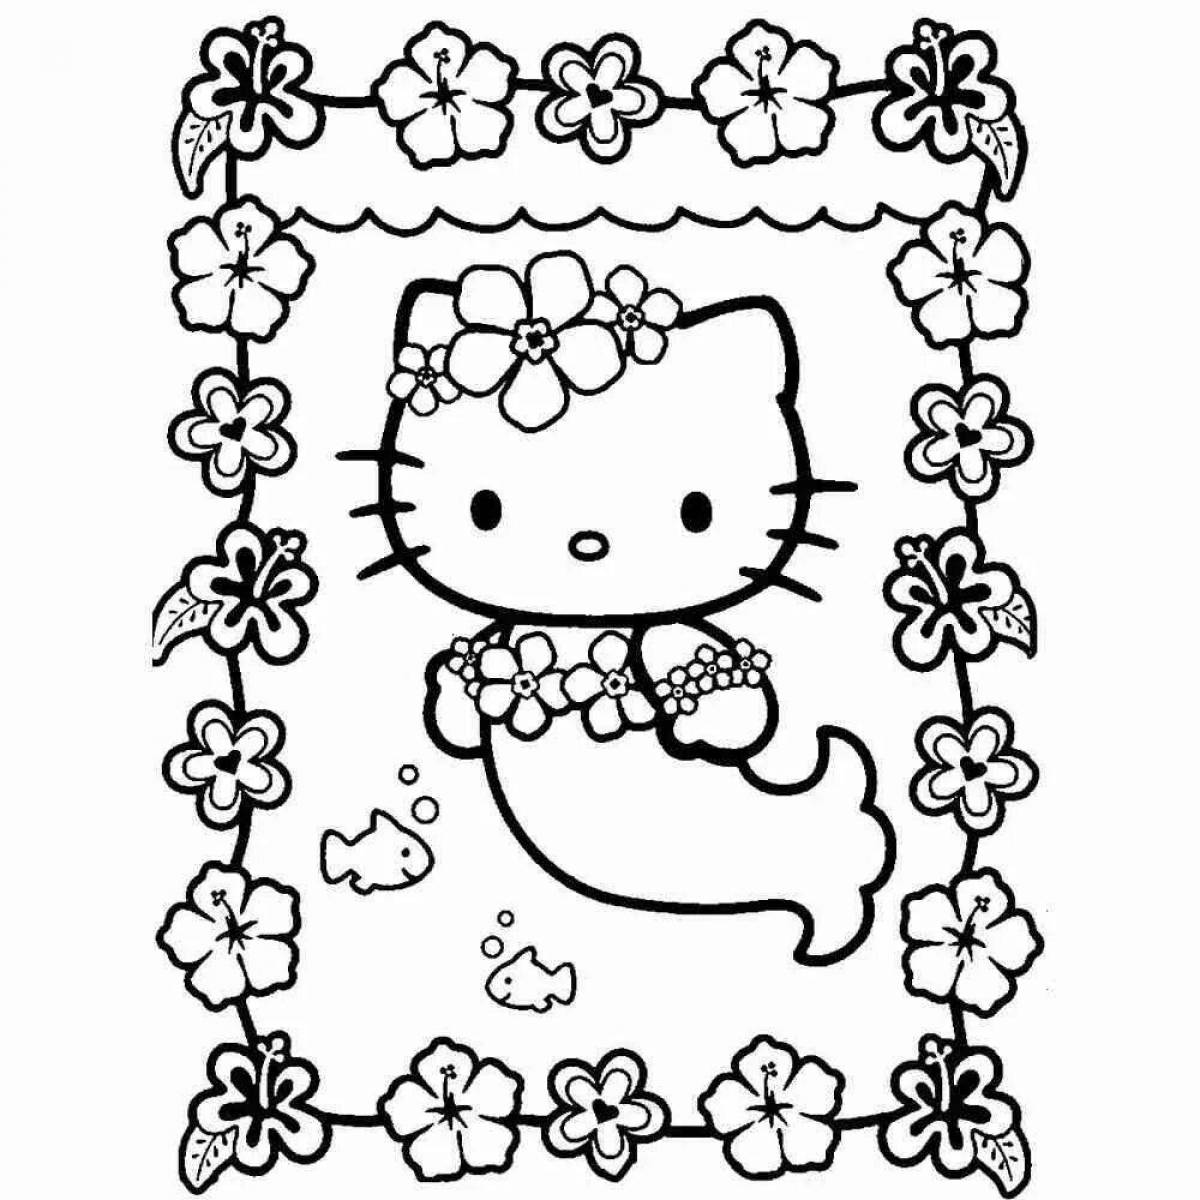 Coloring book nice aster kitty